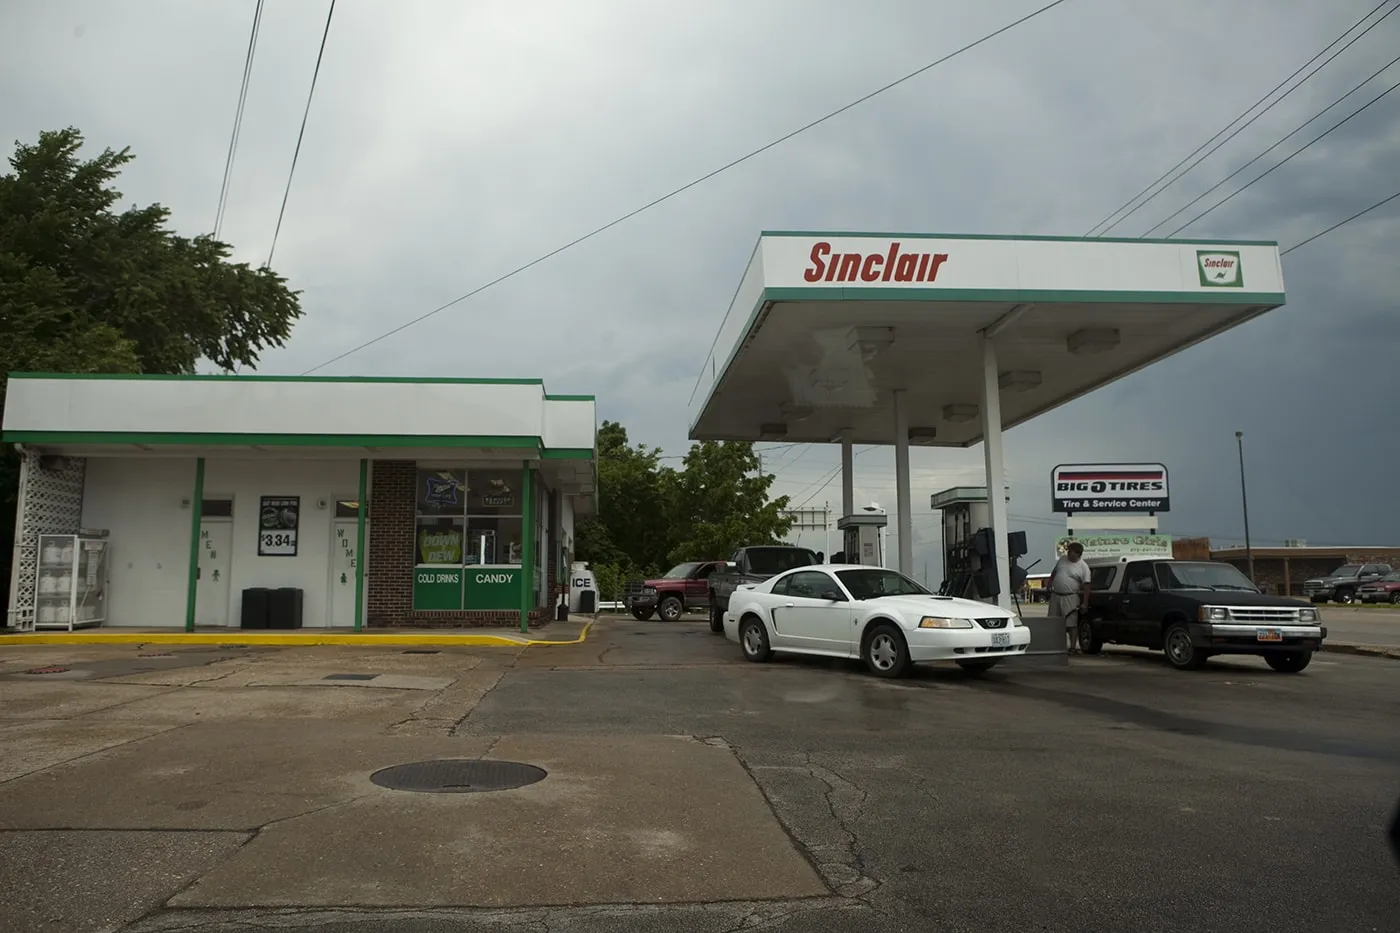 Sinclair gas station without a dinosaur in Missouri